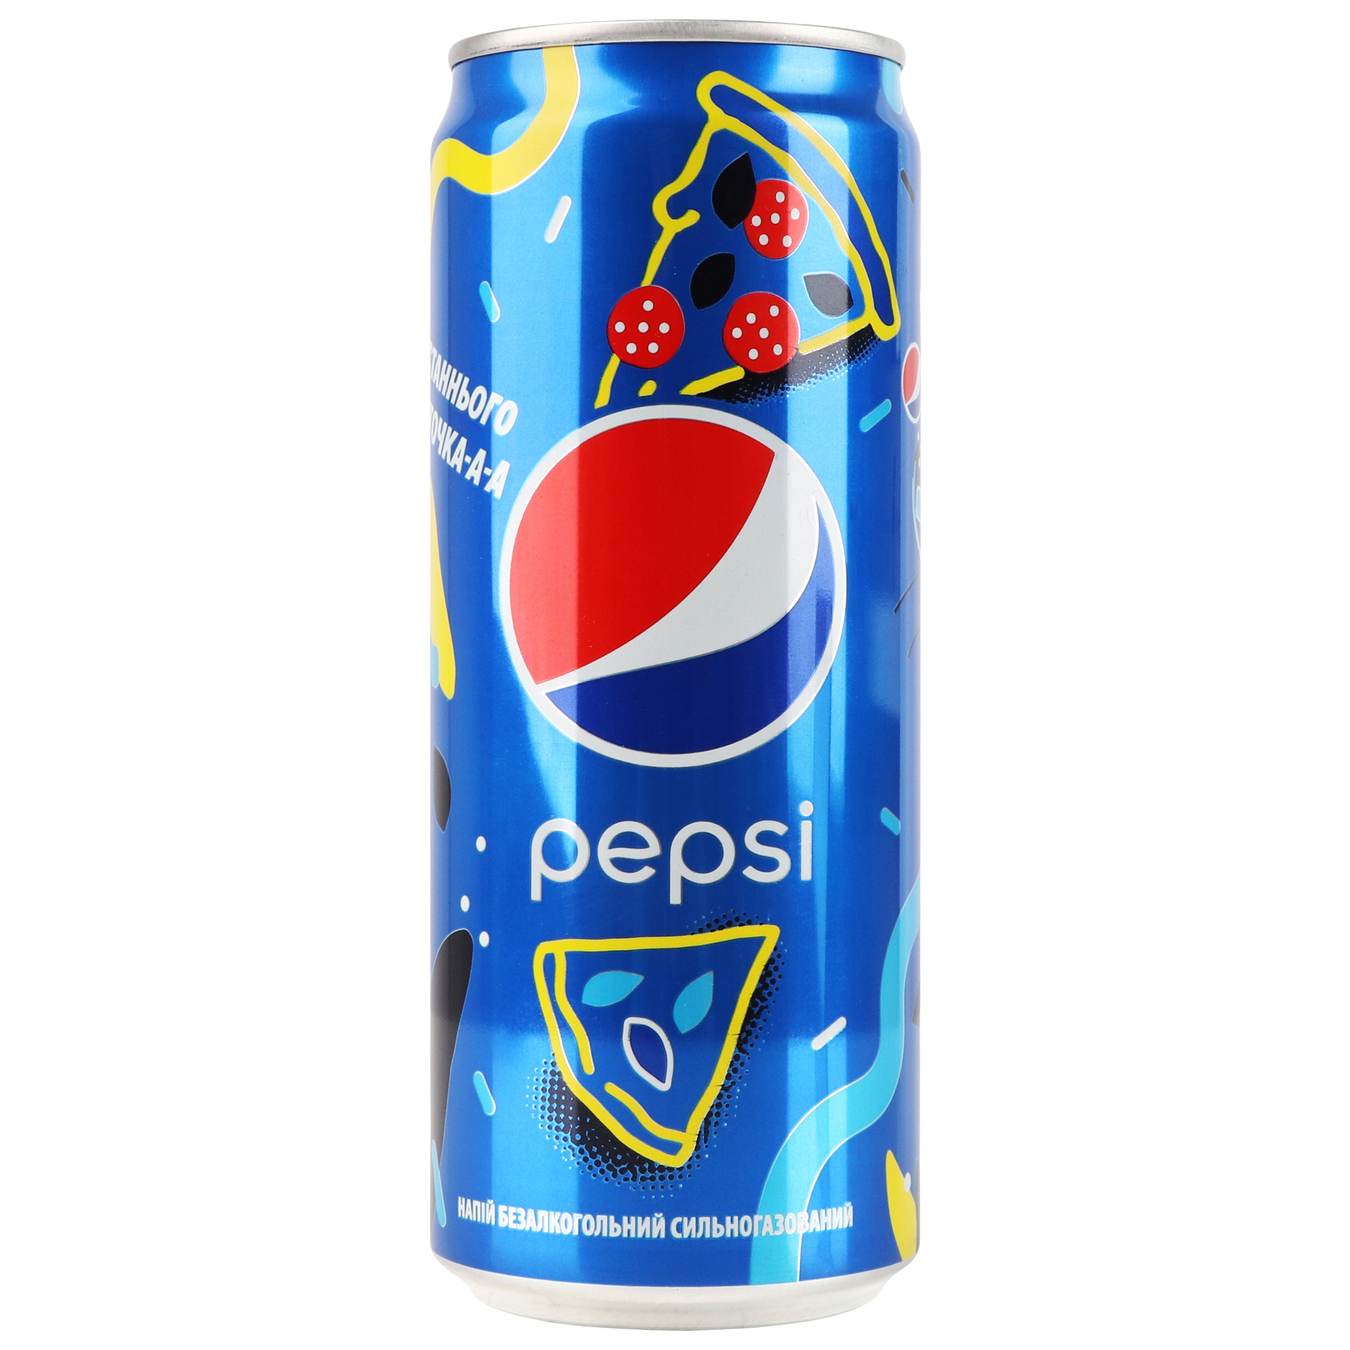 Pepsi carbonated drink 330ml can